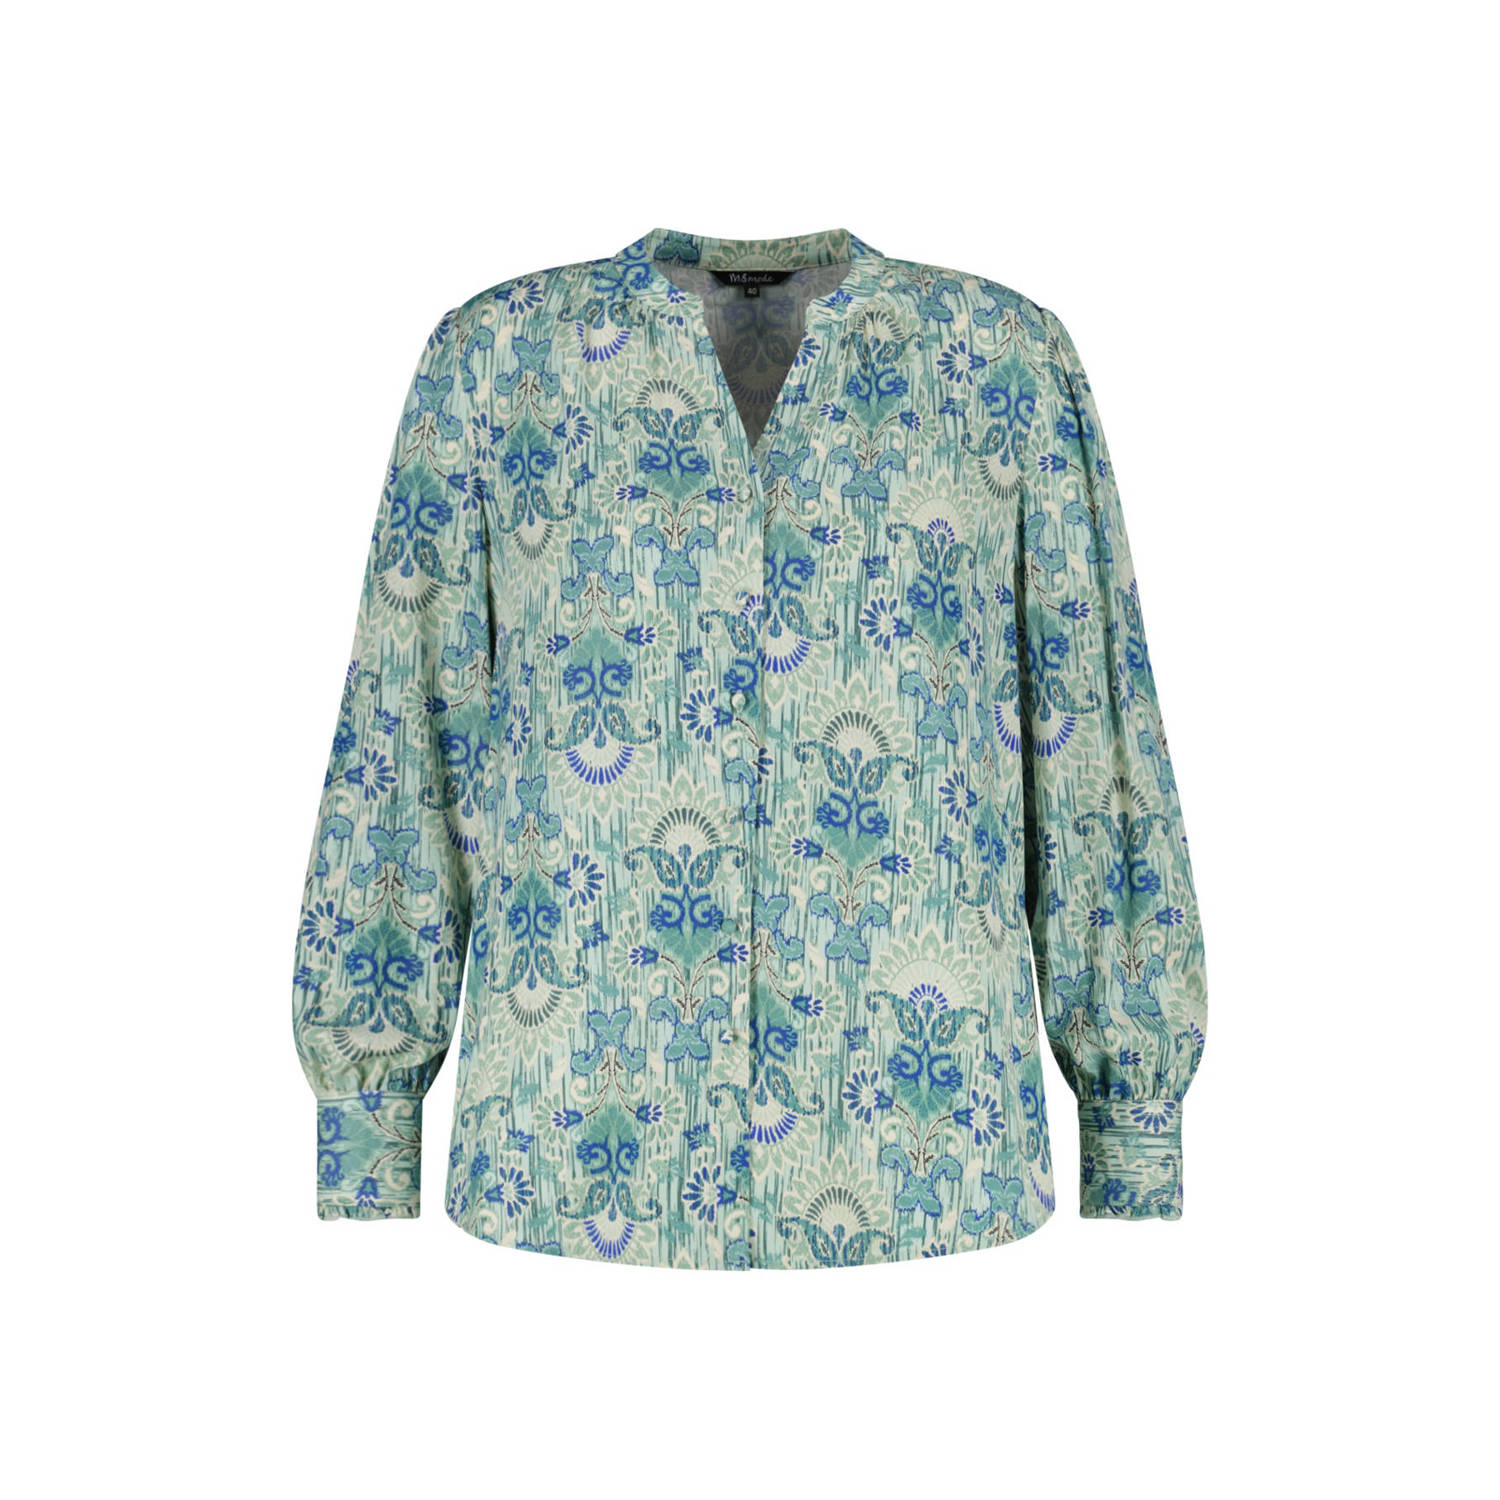 MS Mode blouse met all over print lichtblauw blauw